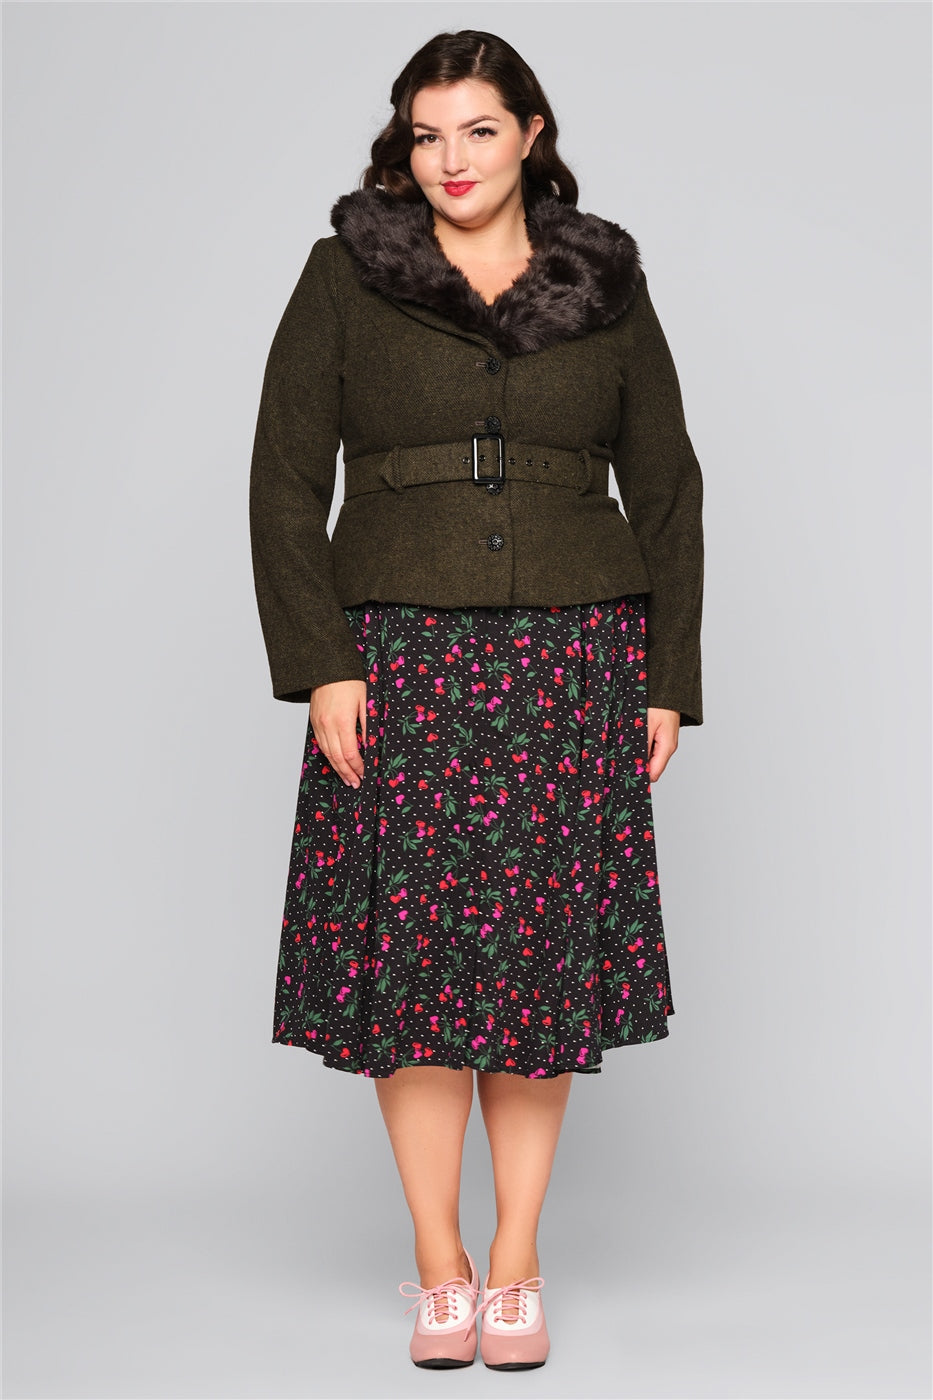 Curvy brunette model wearing a cherry print midi skirt, brogues and a classic olive green jacket with fur trim collar